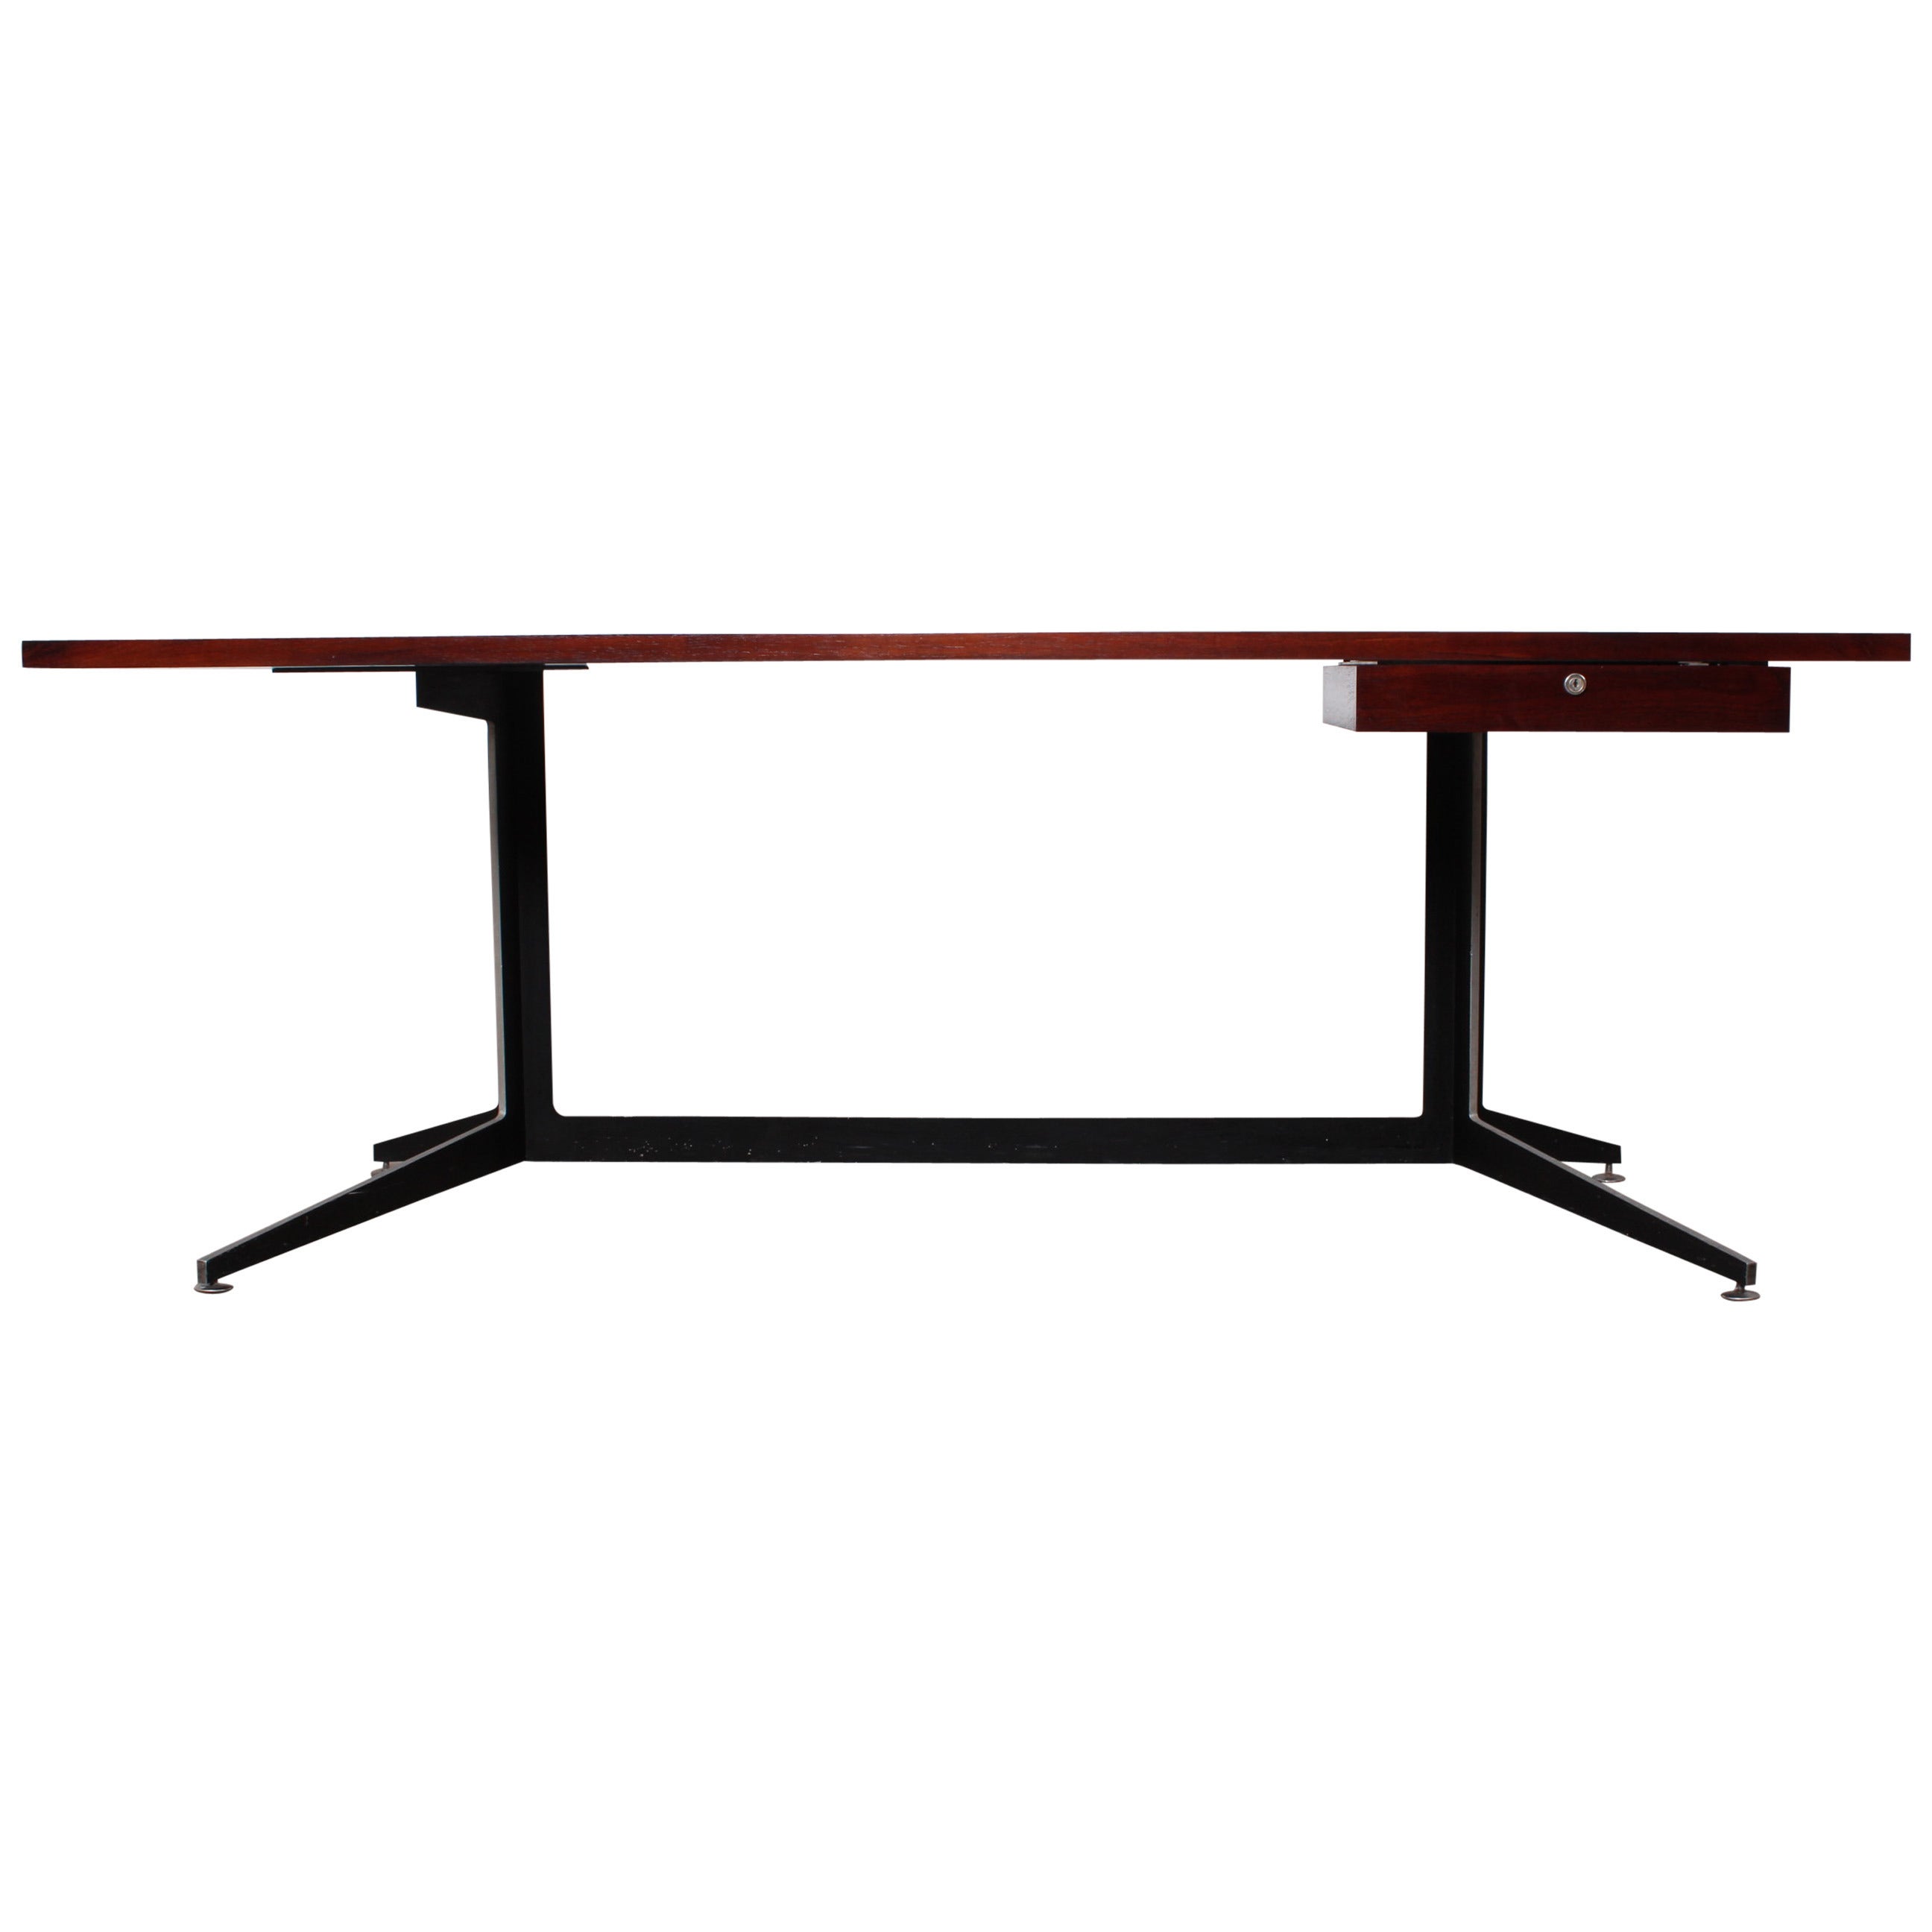 Rosewood Architectural Desk by Ward Bennett for Lehigh Furniture